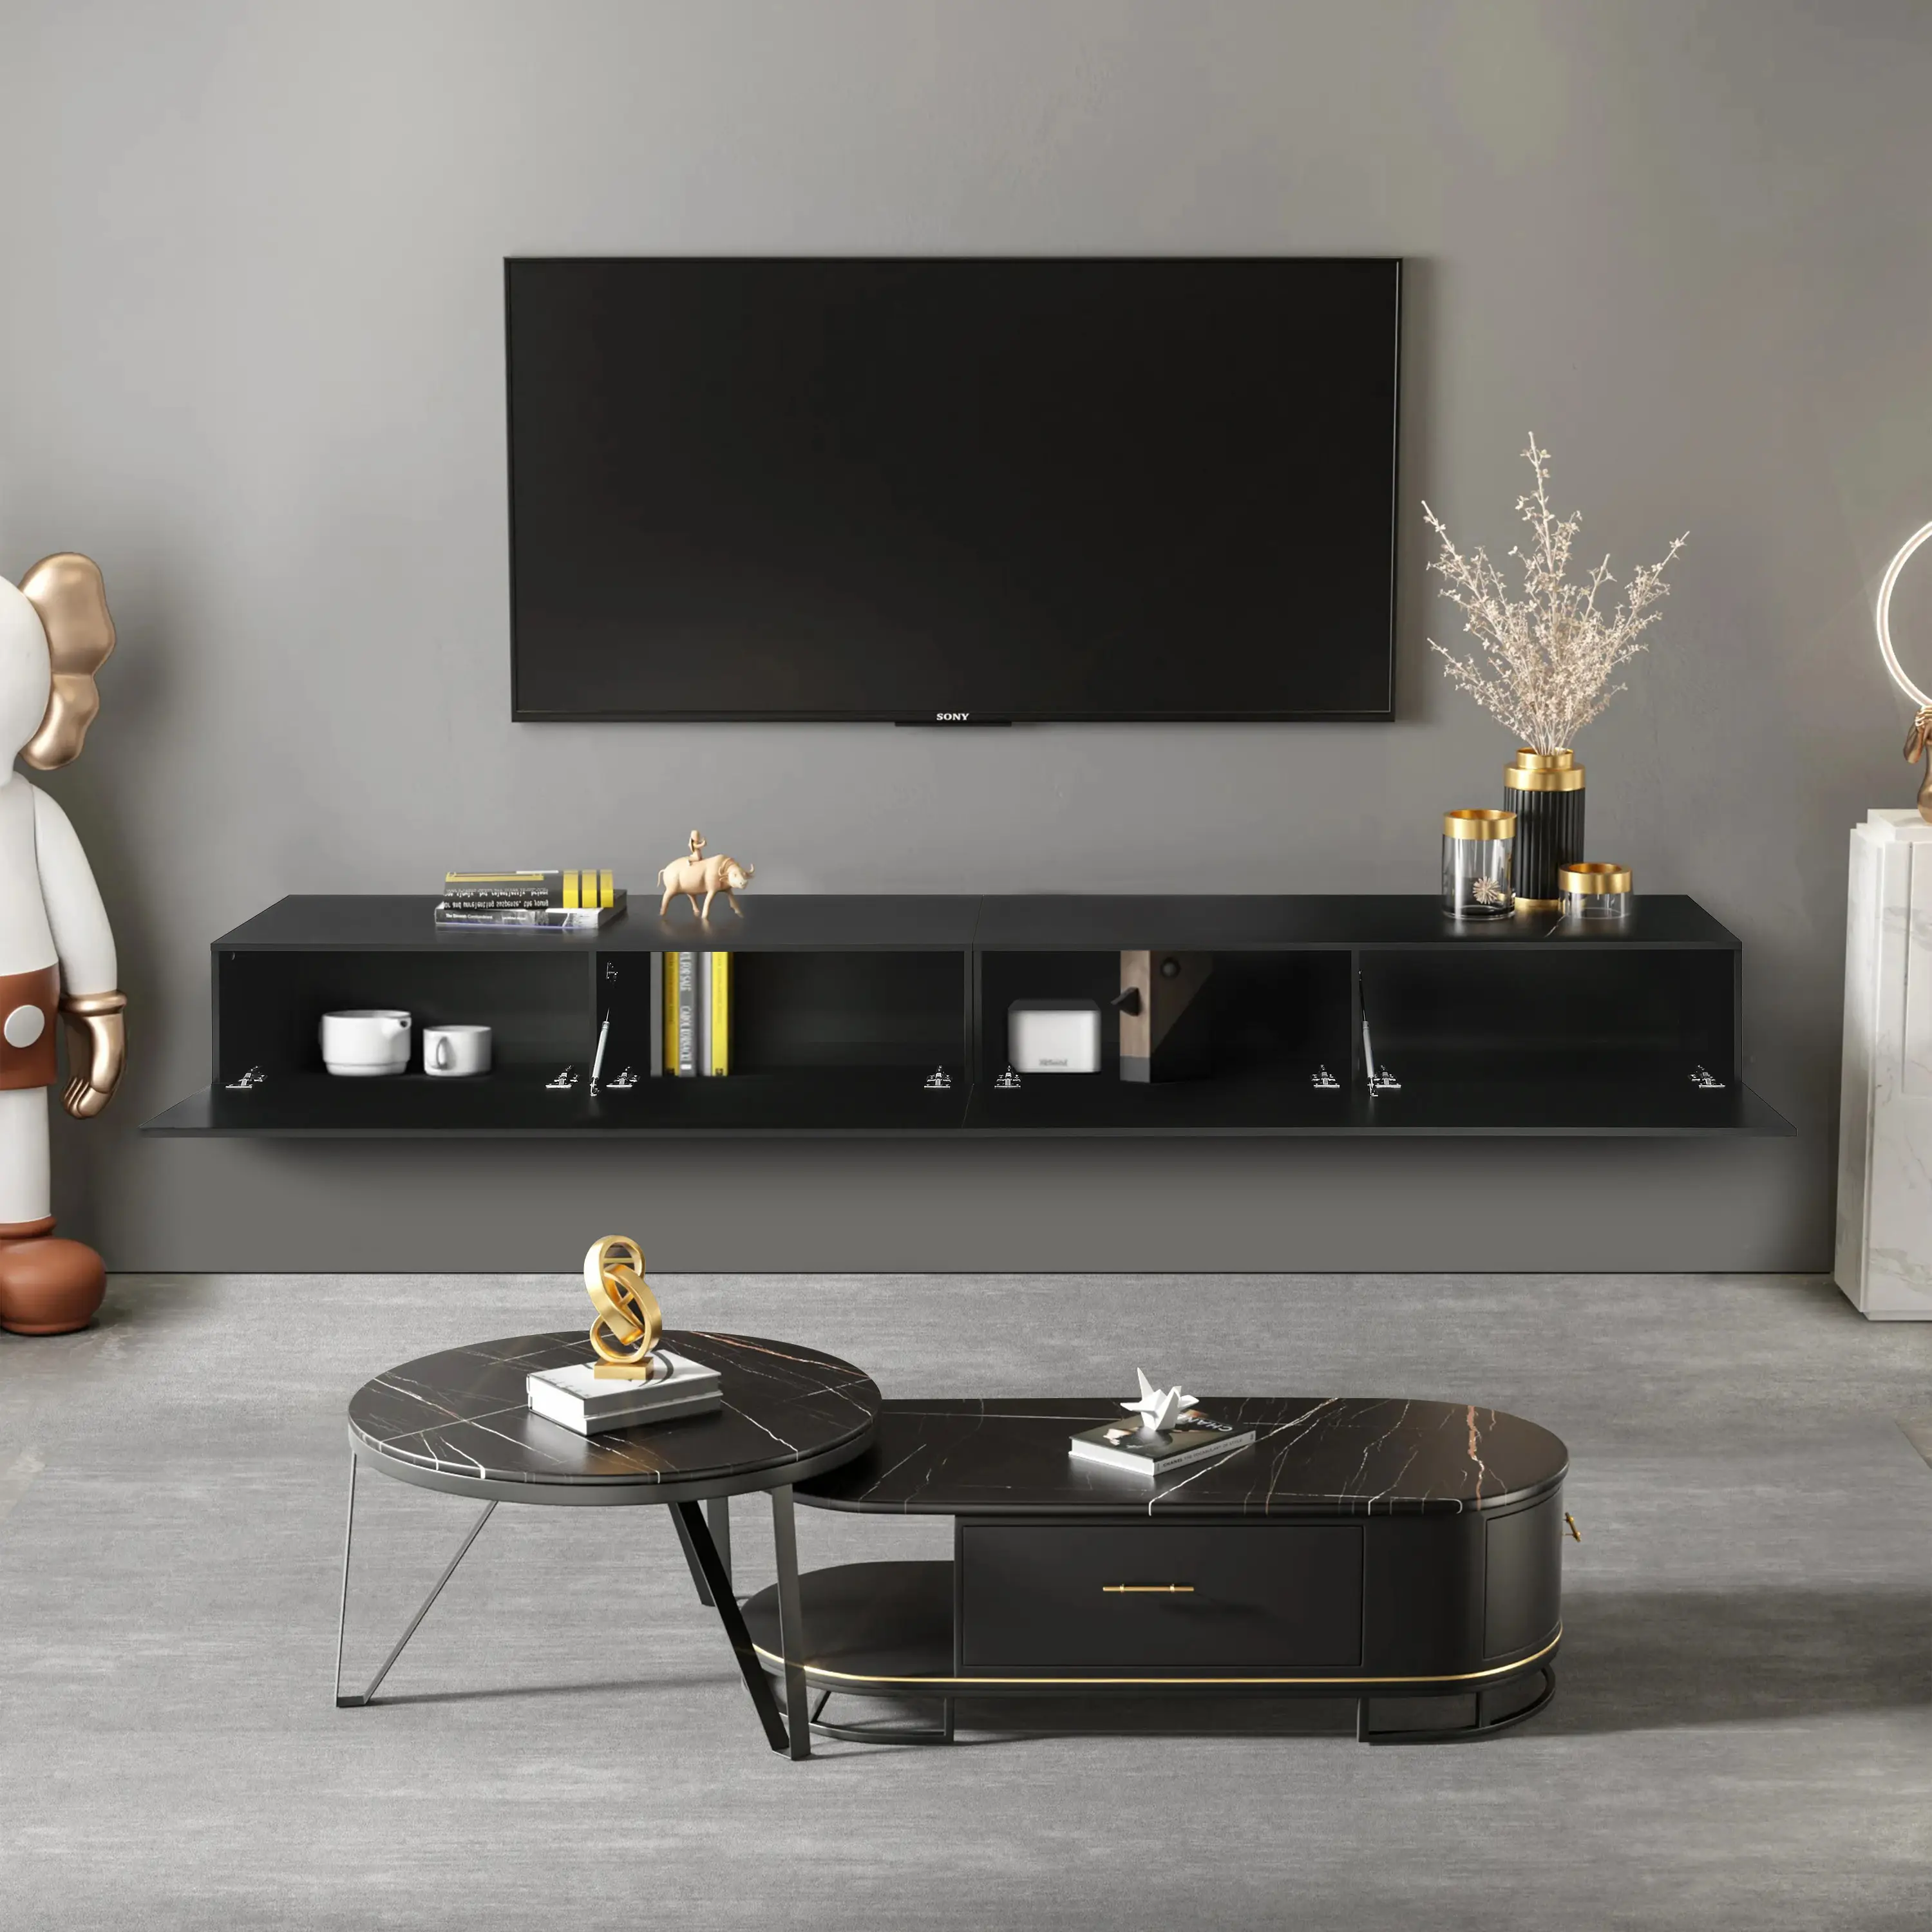 Modern Simple Floating TV cabinet Wall mounted TV stand with storage sections for living room